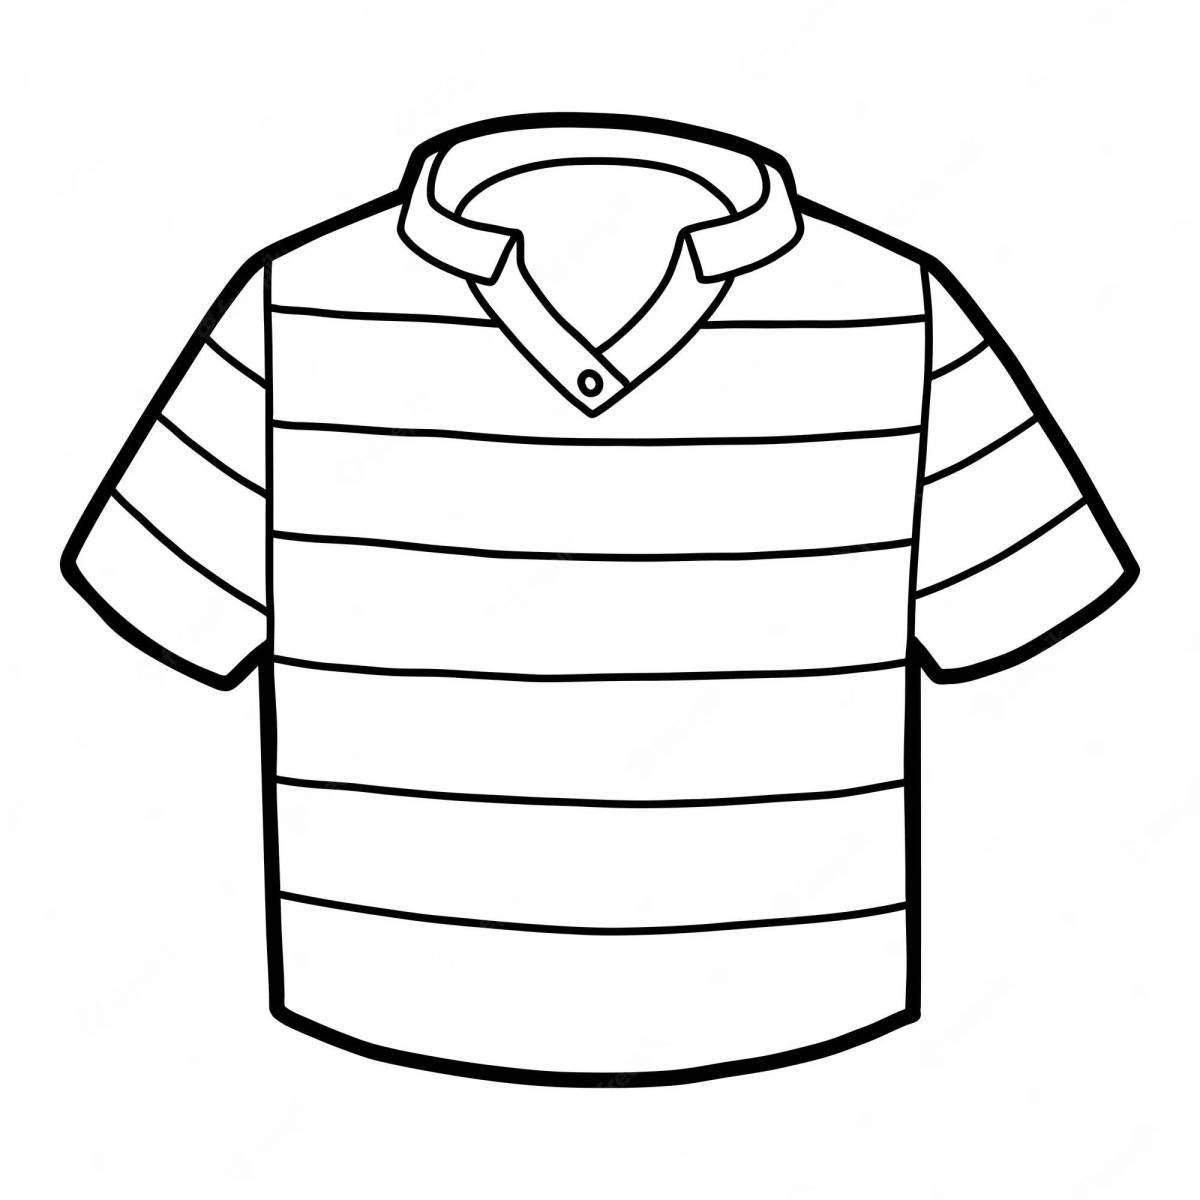 Coloring page cute shirt for 4-5 year olds